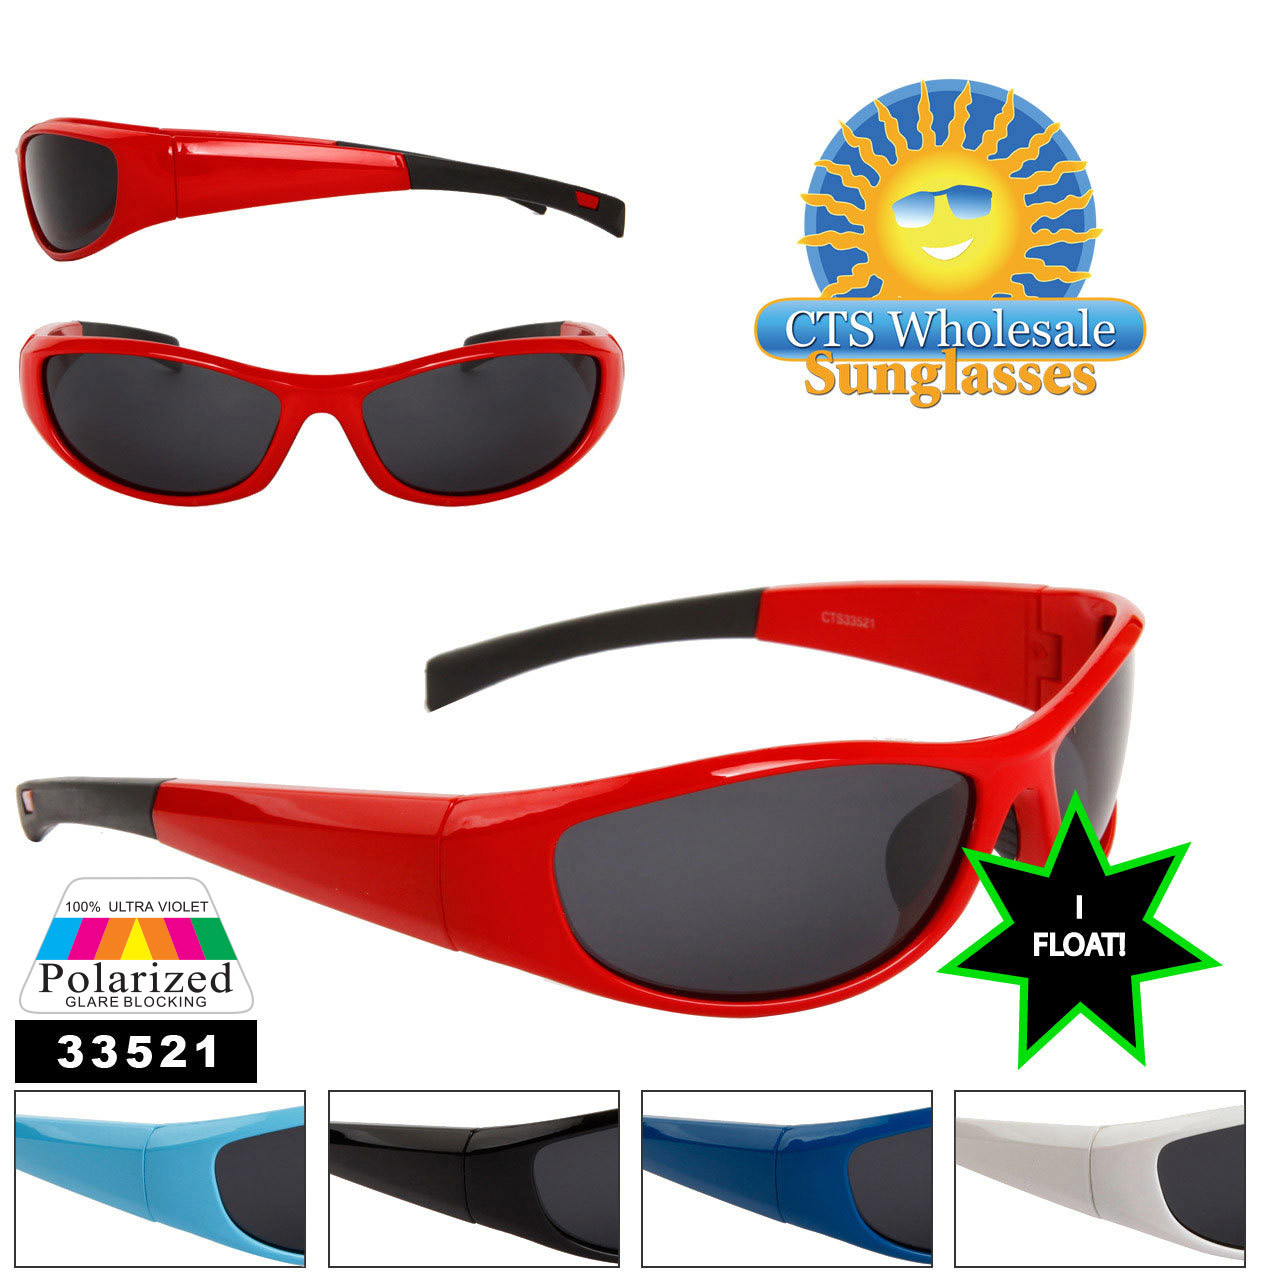 Do your sunglasses float? Polarized Floating Sunglasses are here